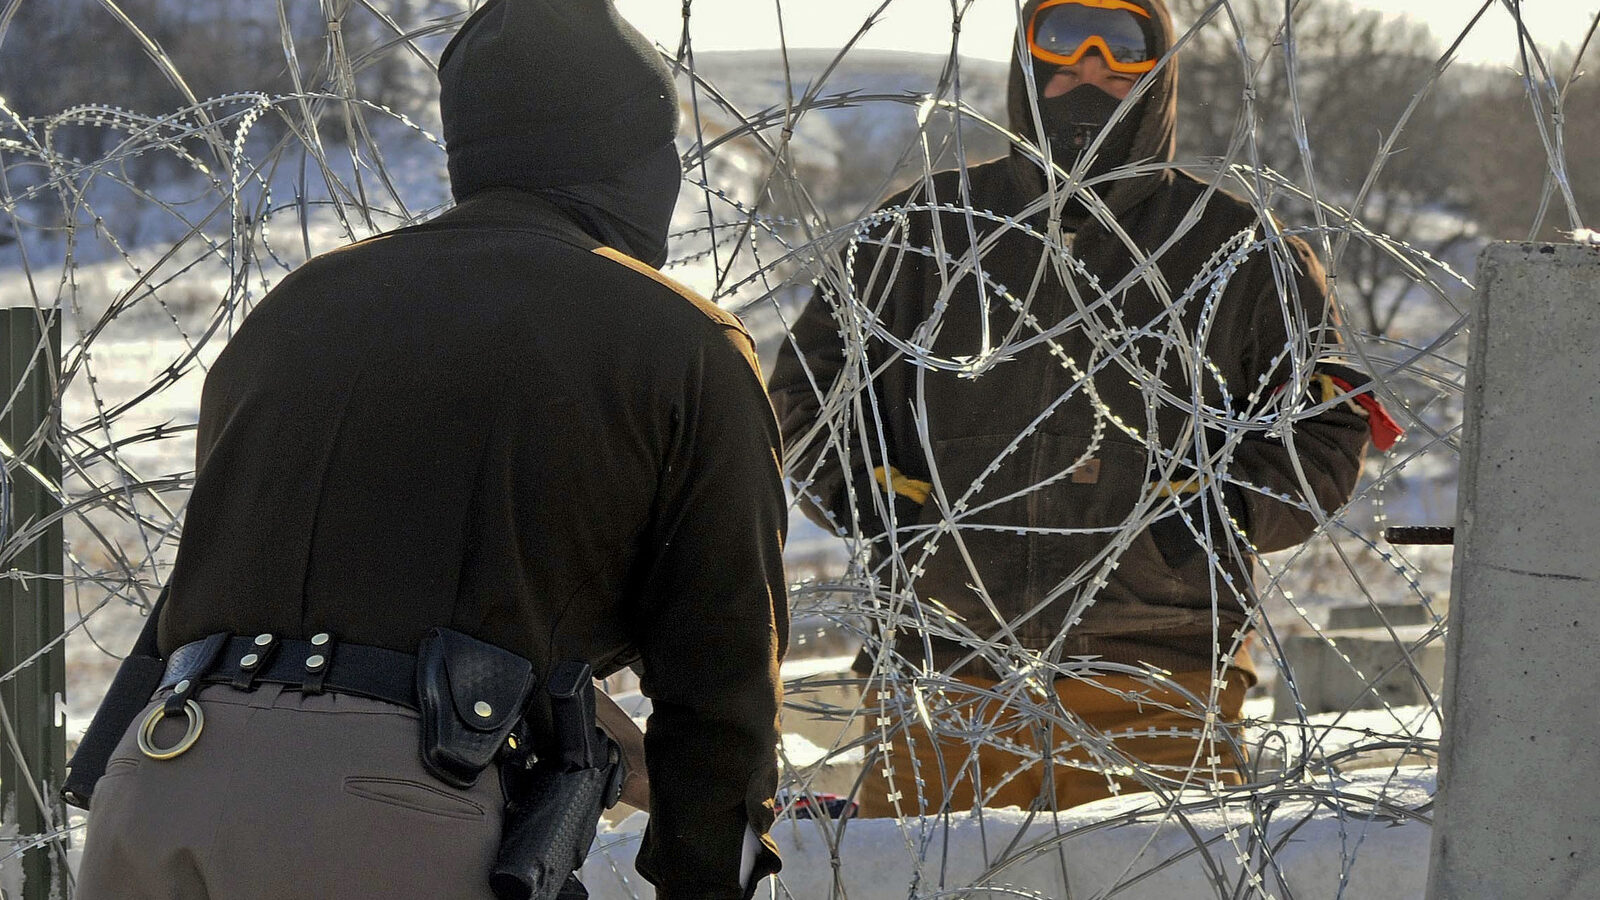 A law enforcement officer speaks to a protester against the Dakota Access Pipeline through a wall of razor wire on the Backwater Bridge over Cantapeta Creek on Thursday afternoon, Dec. 8, 2016. (Tom Stromme/The Bismarck Tribune via AP)